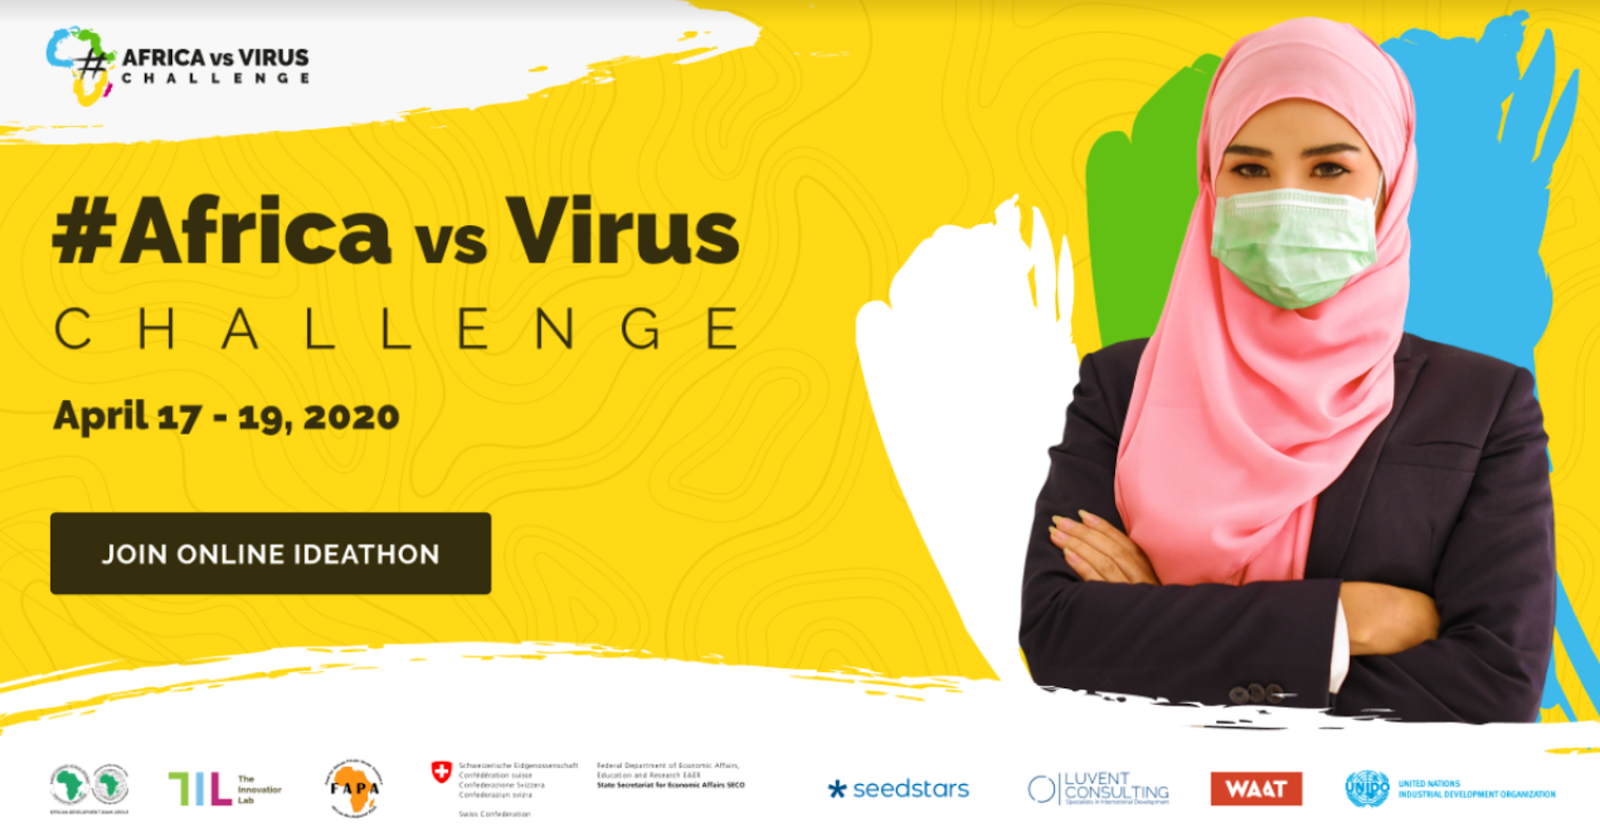 The African Development Bank and its partners want your ideas for beating the COVID-19 pandemic